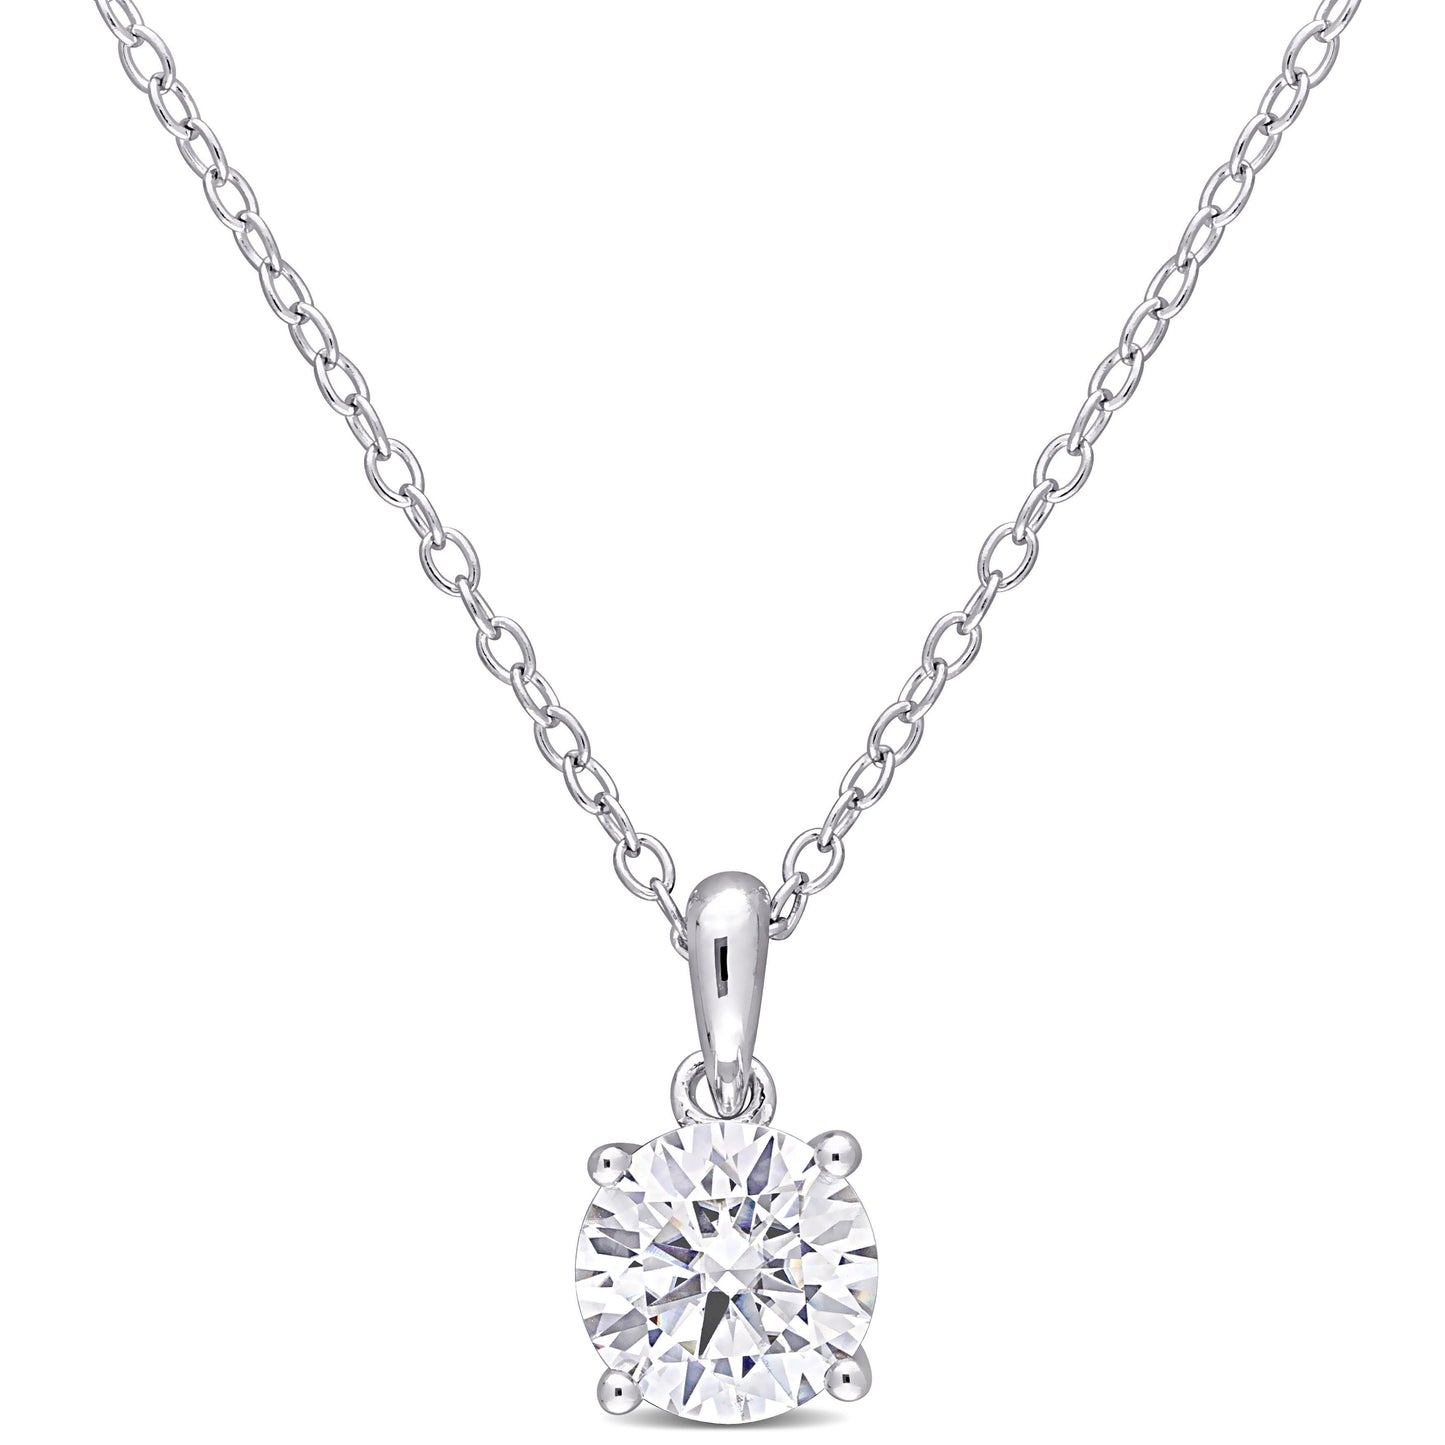 1ct Moissanite Pendant in Sterling Silver